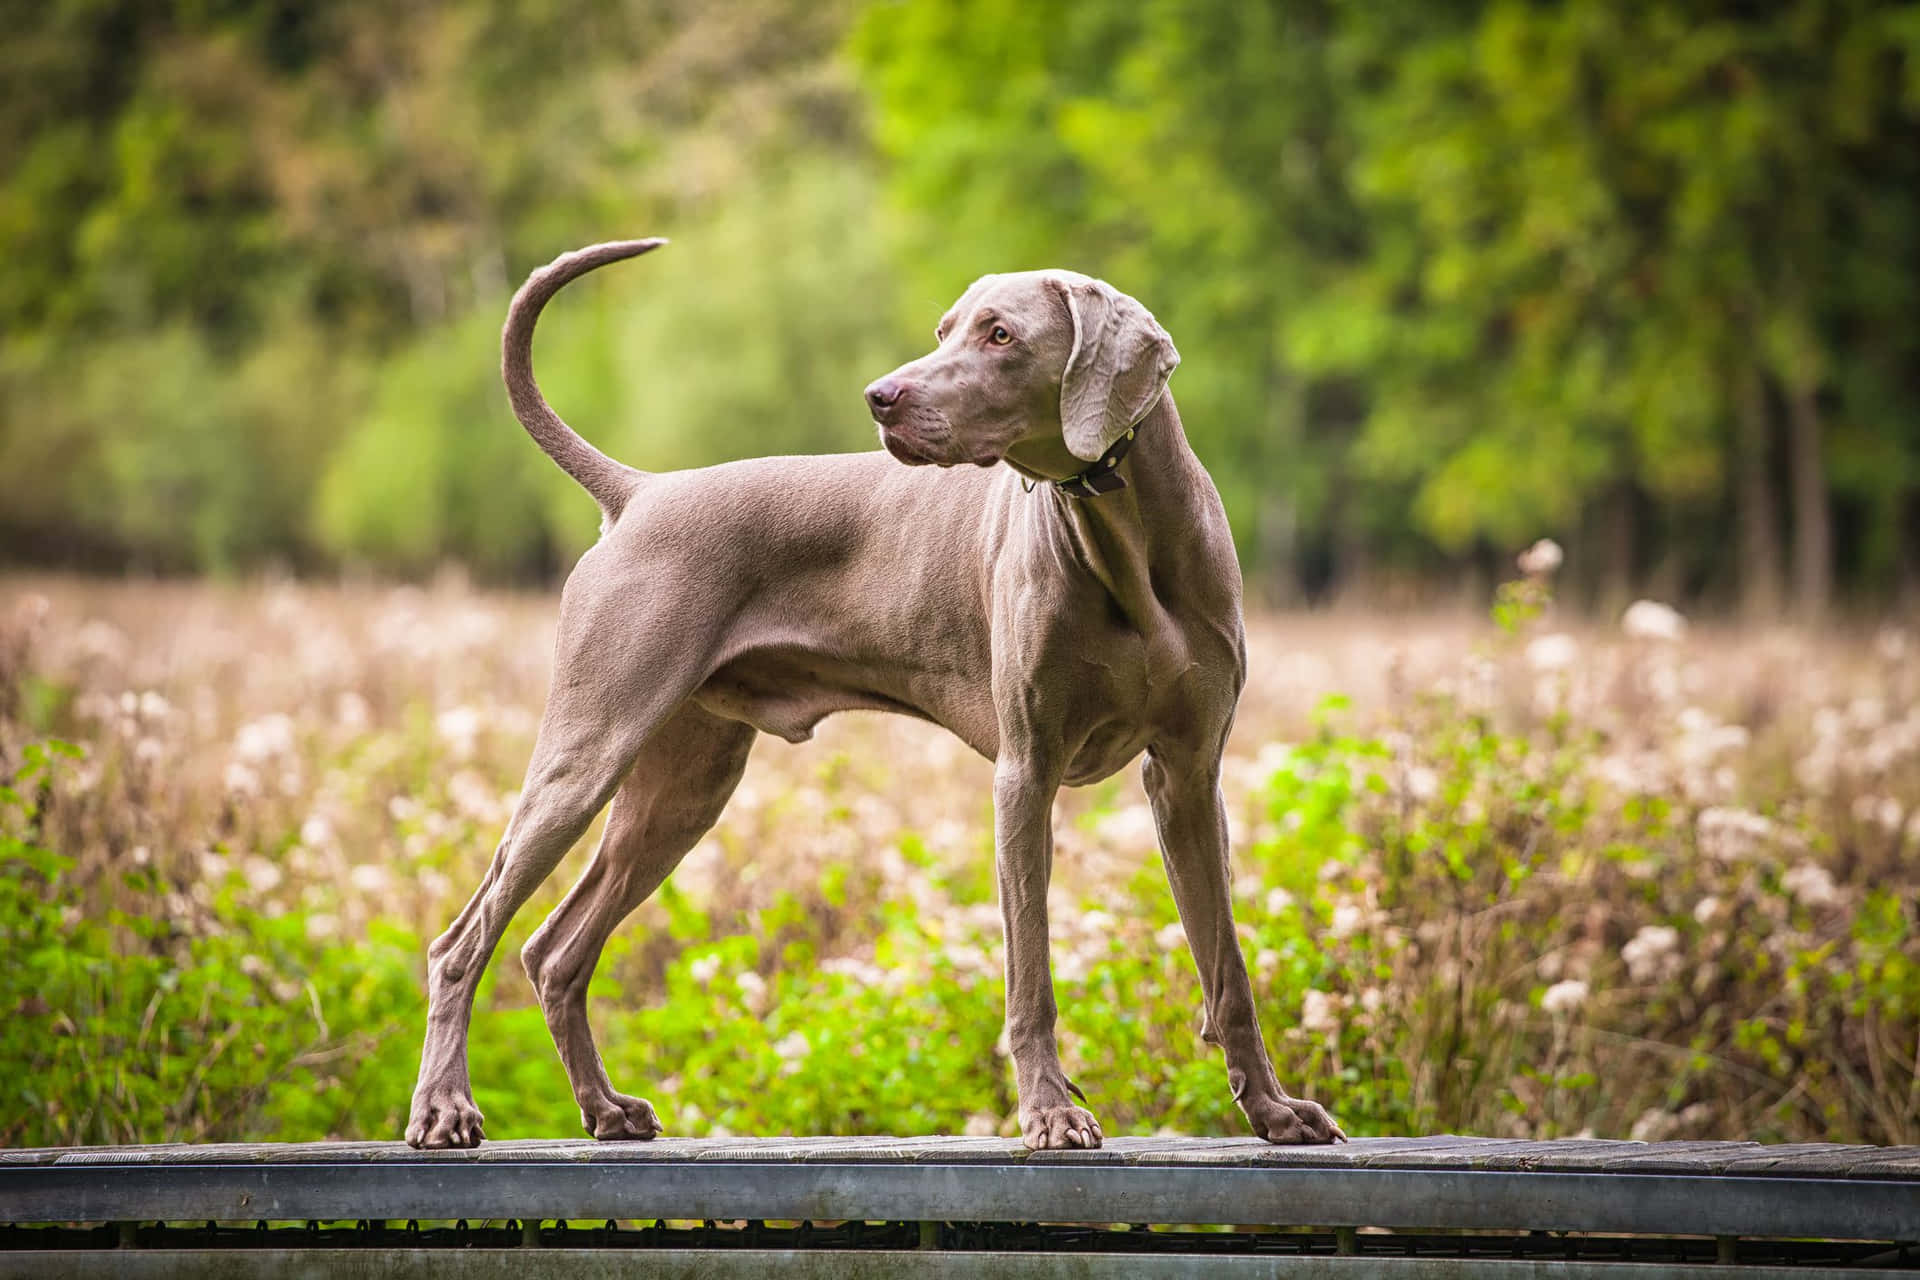 A beautiful Weimaraner stands confidently in the park.